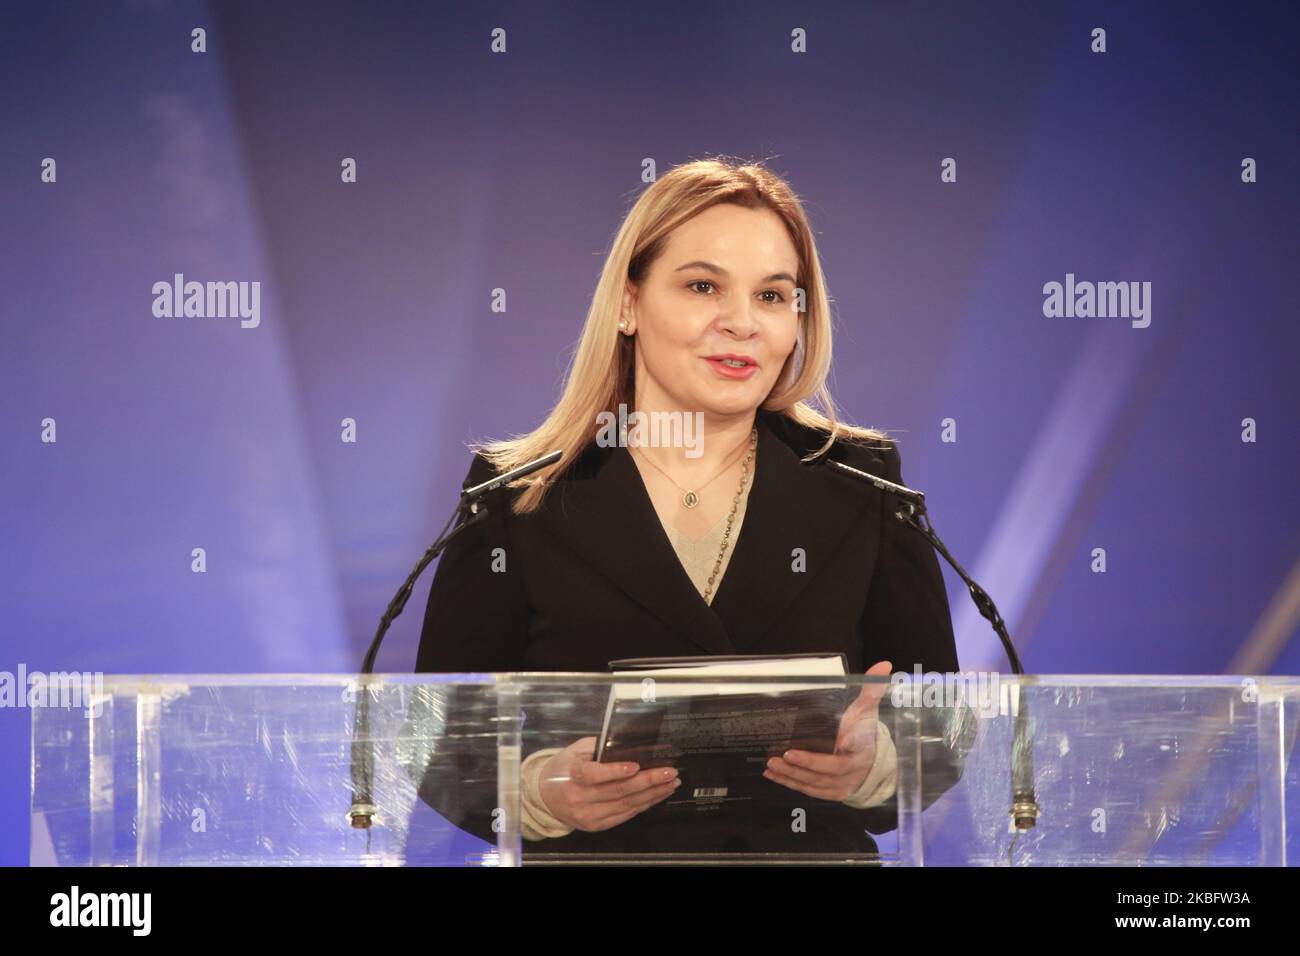 Monika Kryemadhi, Chairwoman of the Albania Socialist Movement for Integration Party, speaking to thousands of members of the main Iranian opposition movement, the Mujahedin-e Khalq (MEK) on January 29, 2020 in Ashraf-3, Albania. Monika Kryemadhi said in your museum and in the book of martyrs, I found the force and motivation of the Iranian Resistance to fight for freedom and democracy. This is the same force that enabled the people of Albania to achieve freedom and democracy. (Photo by Siavosh Hosseini/NurPhoto) Stock Photo